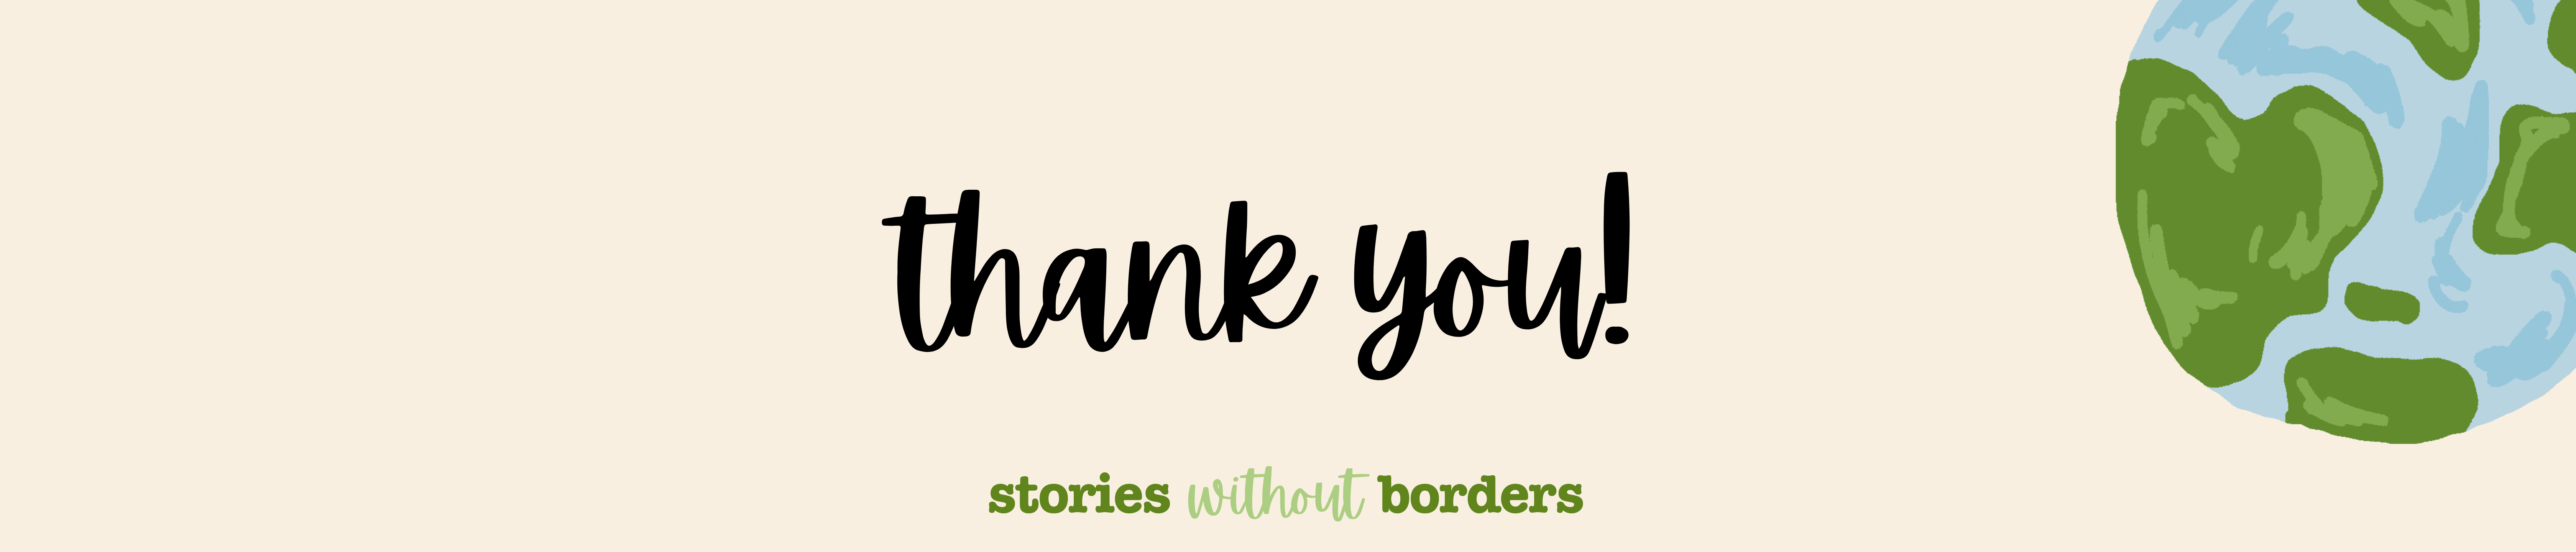 Stories Without Borders Thank You